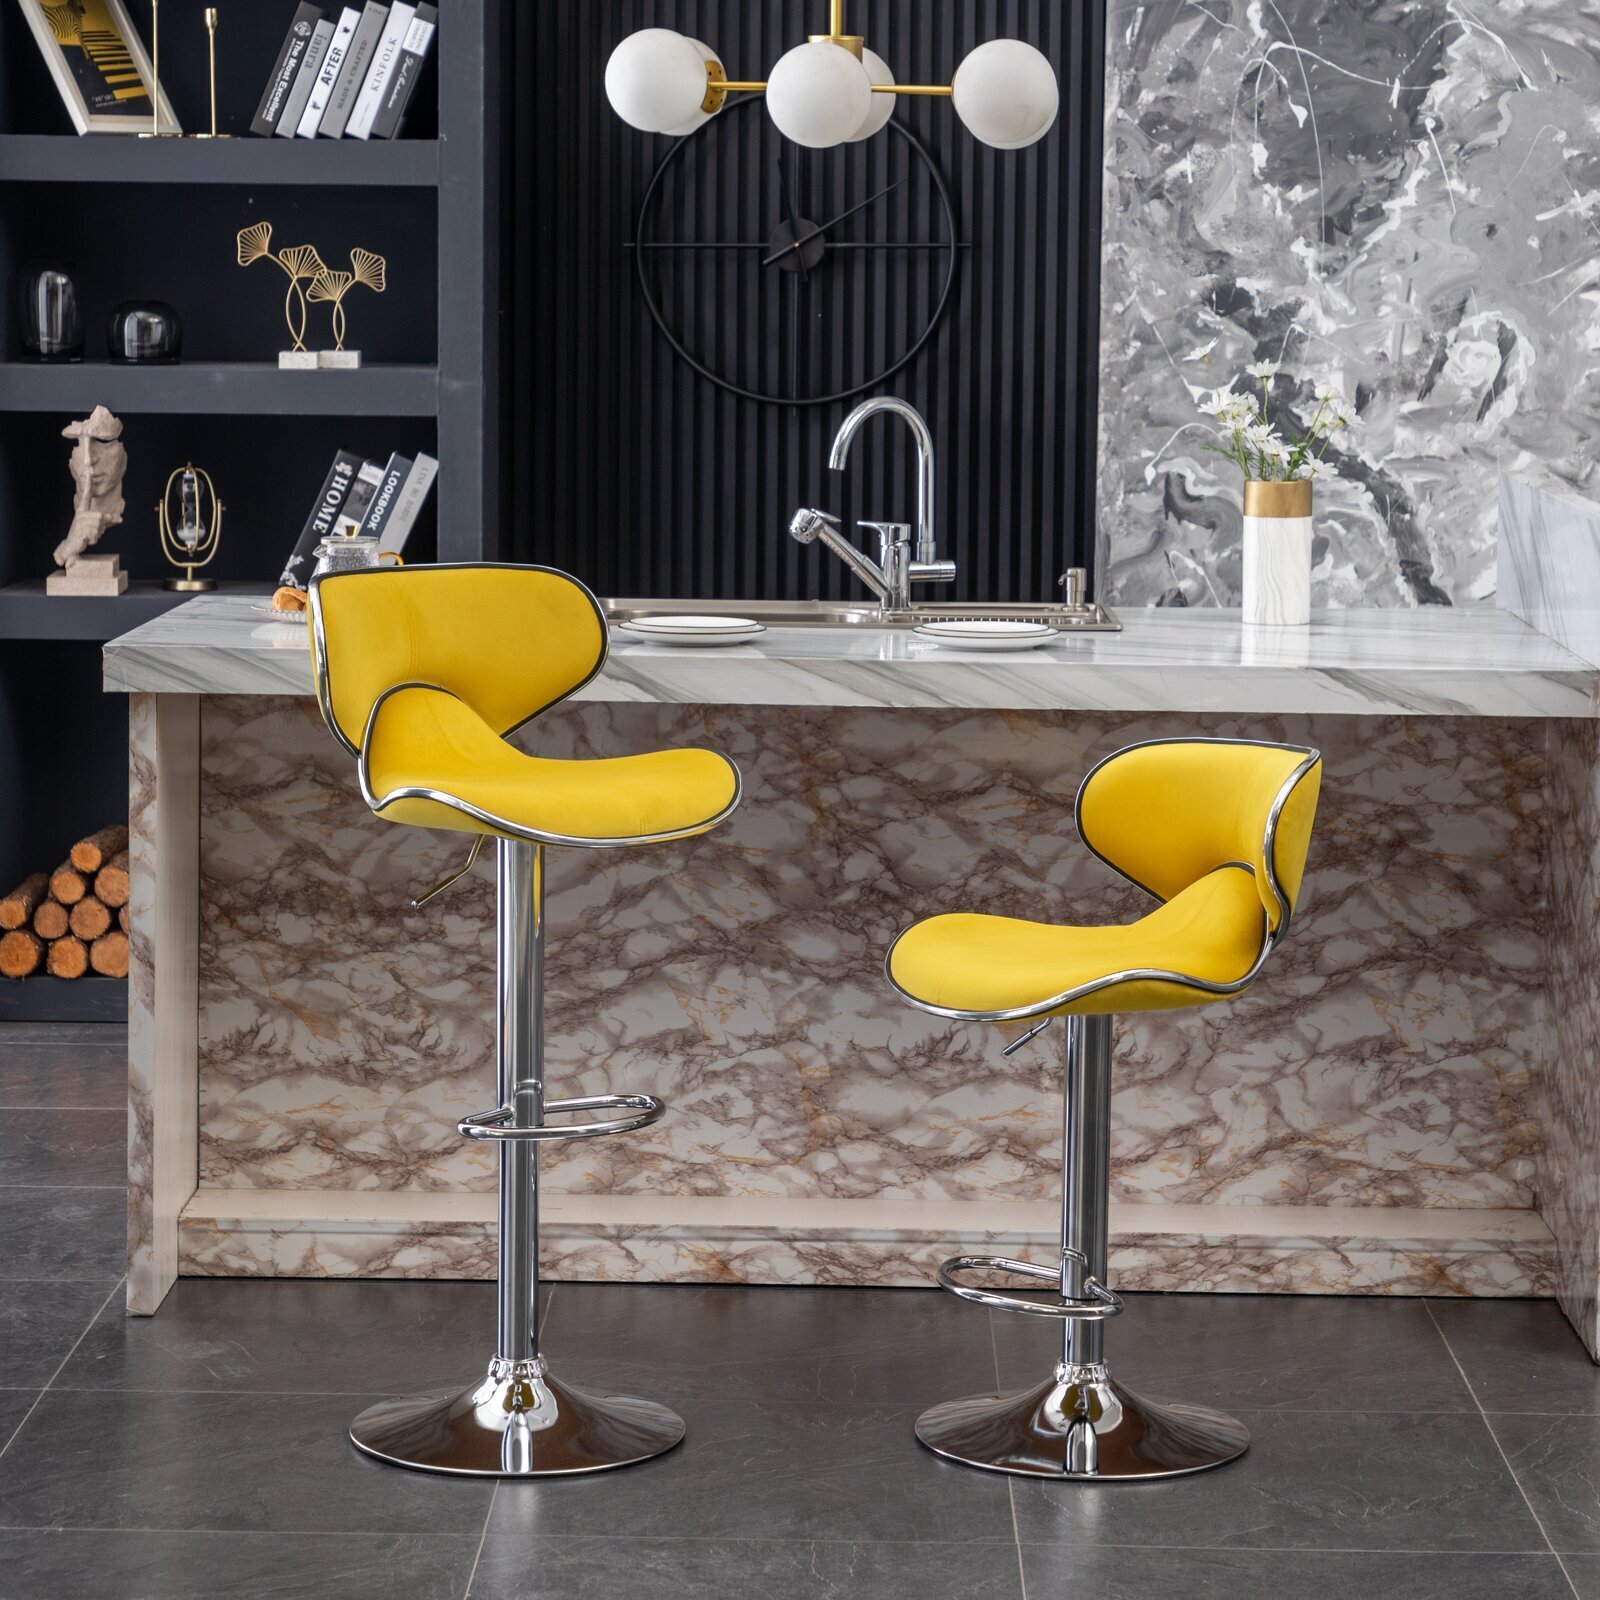 Farelves Velvet Bar Stools Set of 2 PCS Modern Bar Chairs Accent Breakfast Dining Stools for Home Kitchen Counter with Backrest and Gold Metal Legs Mustard Yellow 